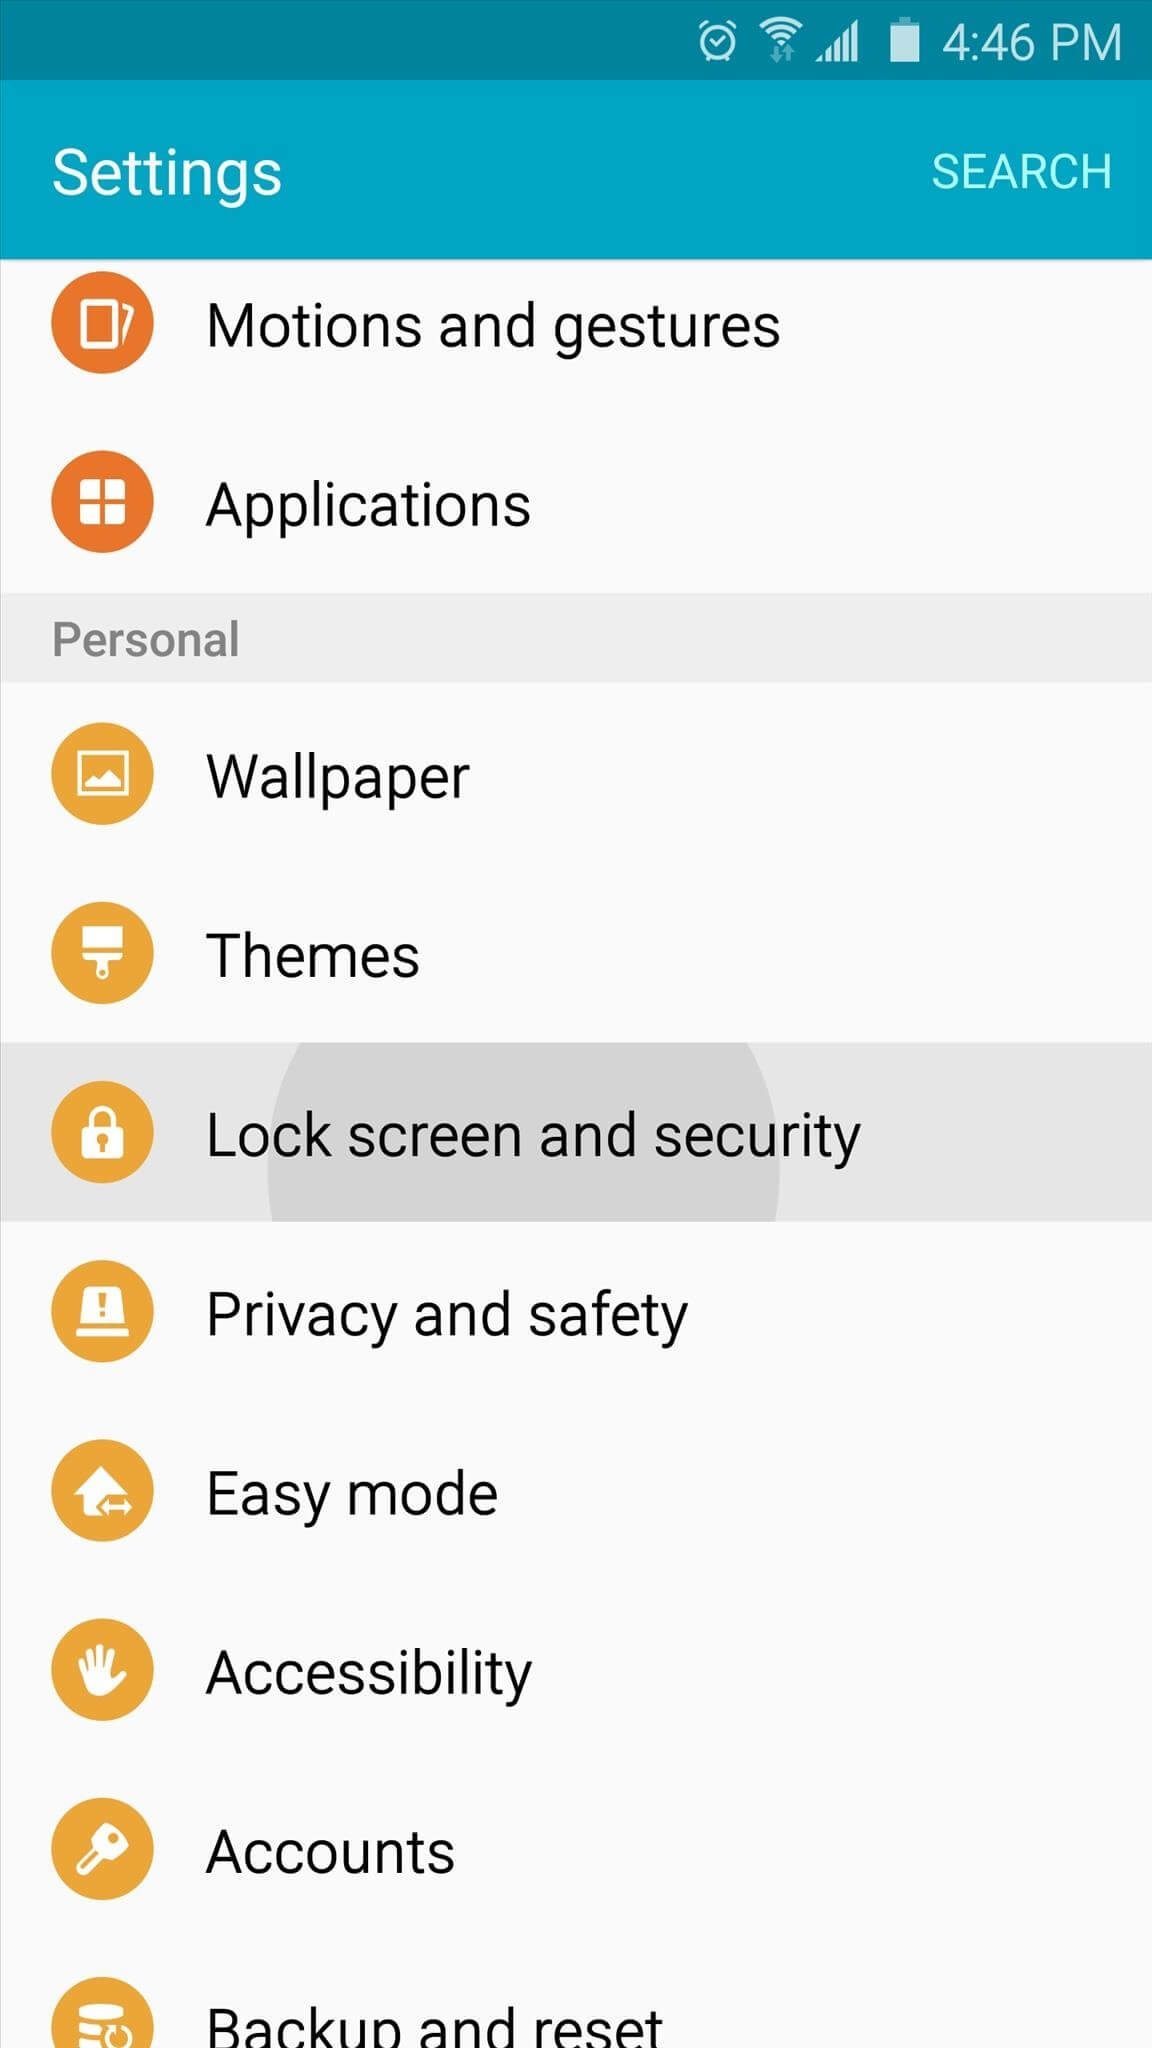 Setting Lock screen and Security